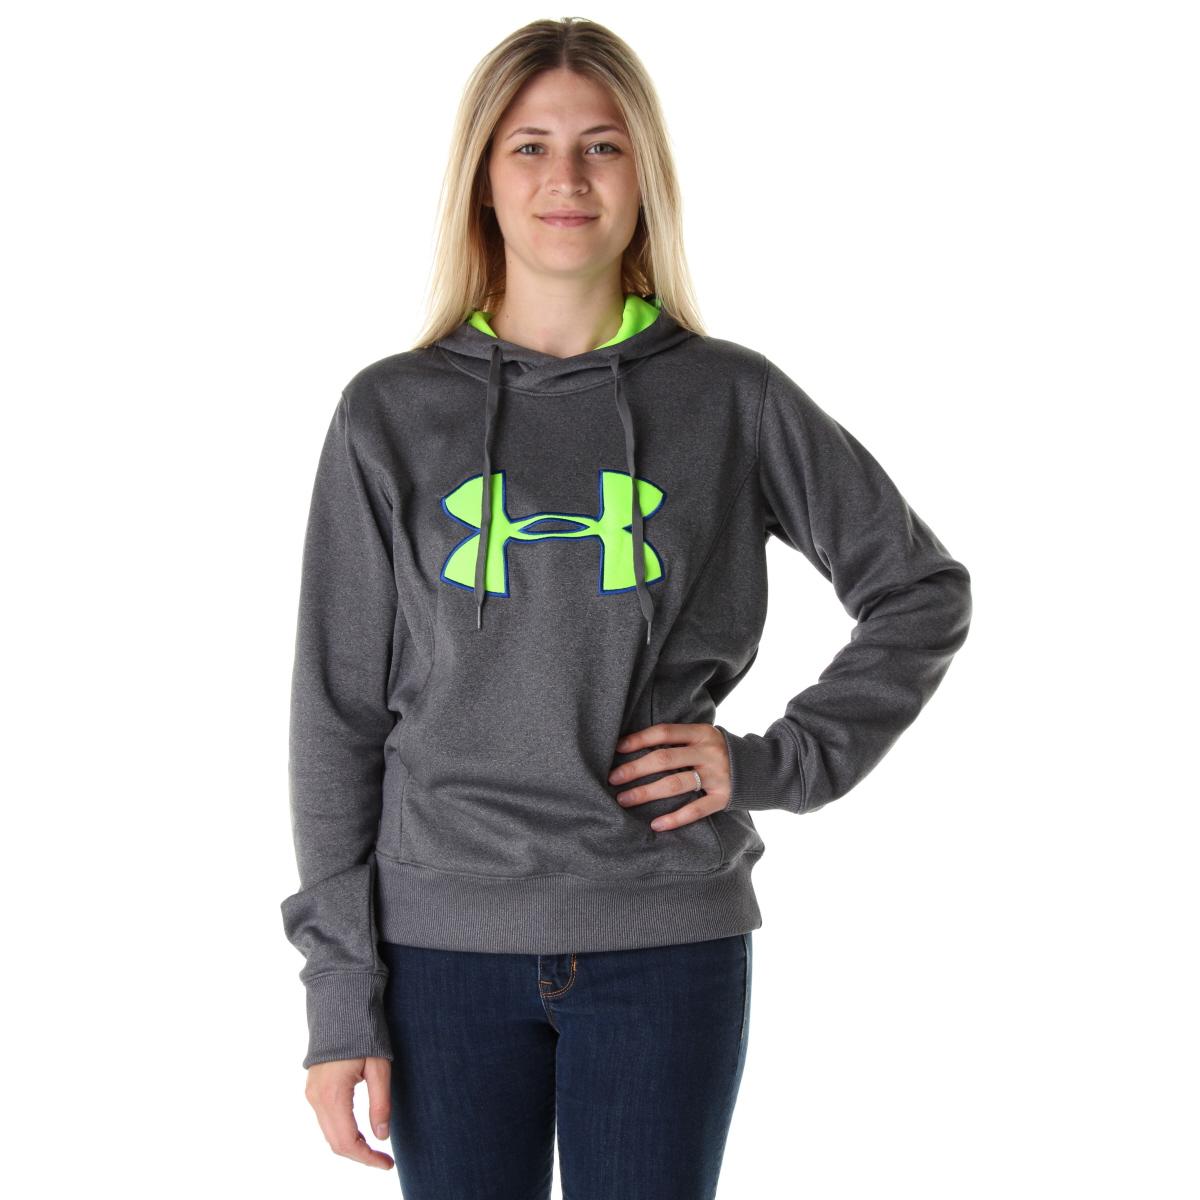 Under Armour 1473 Womens Storm Fleece Semi-Fitted Athletic Hoodie BHFO